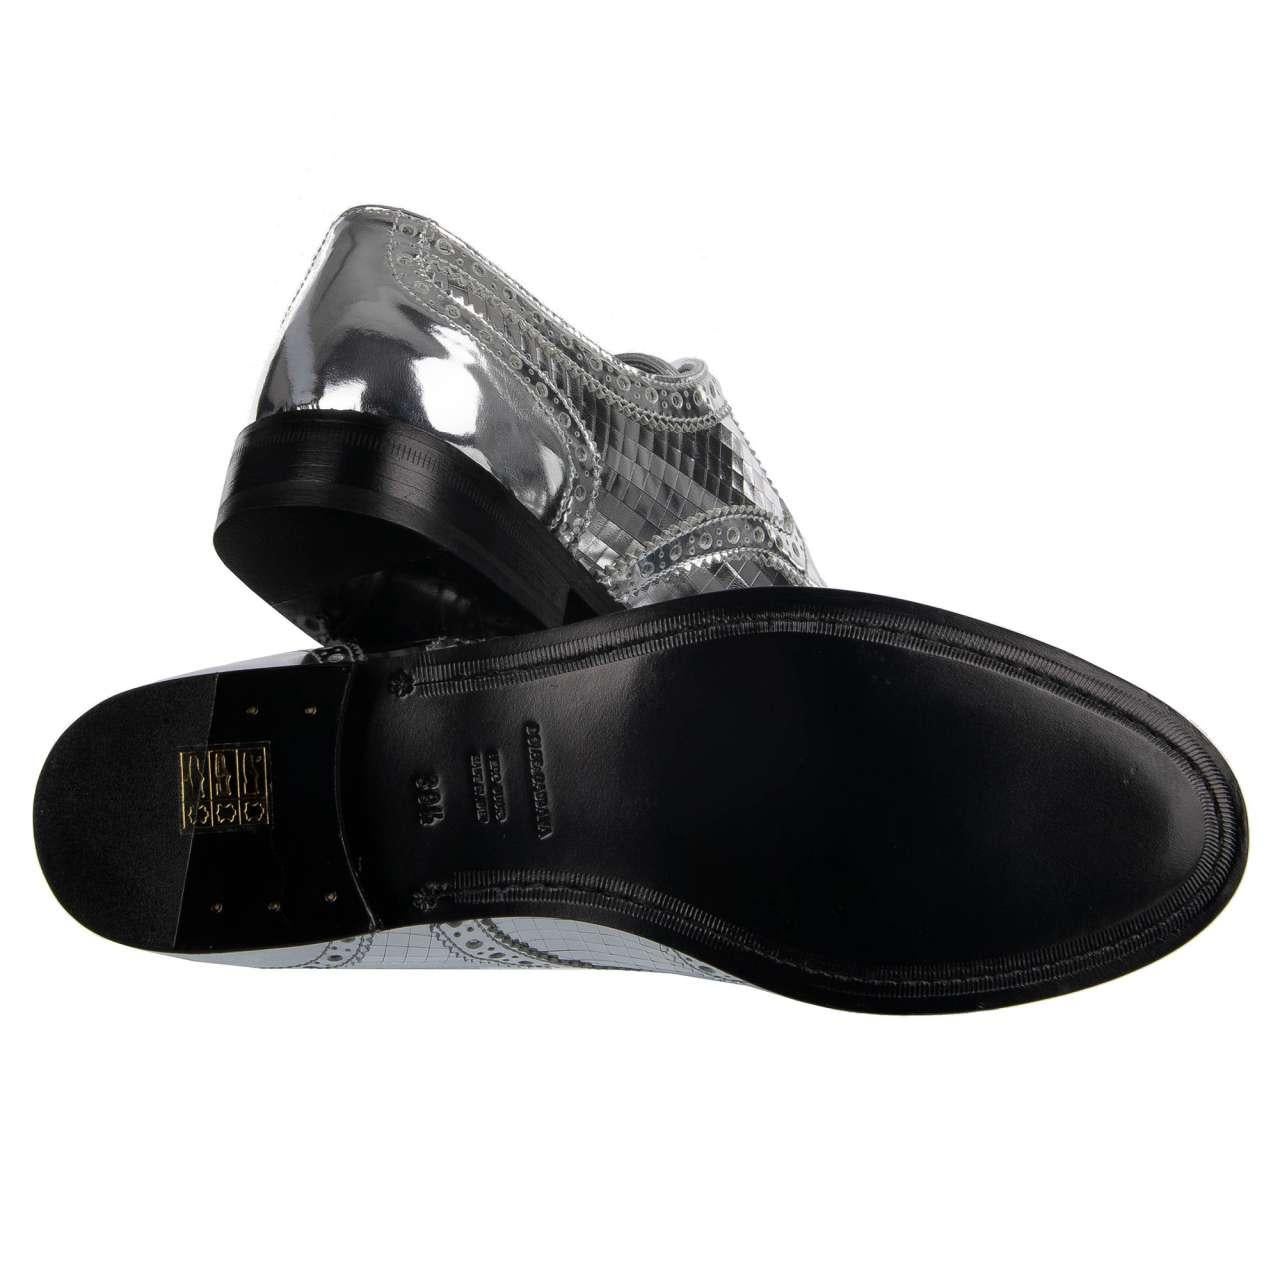 - Disco Style lace-up women derby shoes BOY DONNA made of patent leather by DOLCE & GABBANA Black Label - MADE IN ITALY - Former RRP: EIR 695 - New with Box - Model: CN0012-AE704-80998 - Material: 100% Calfskin - Sole: Leather - Color: Silver -